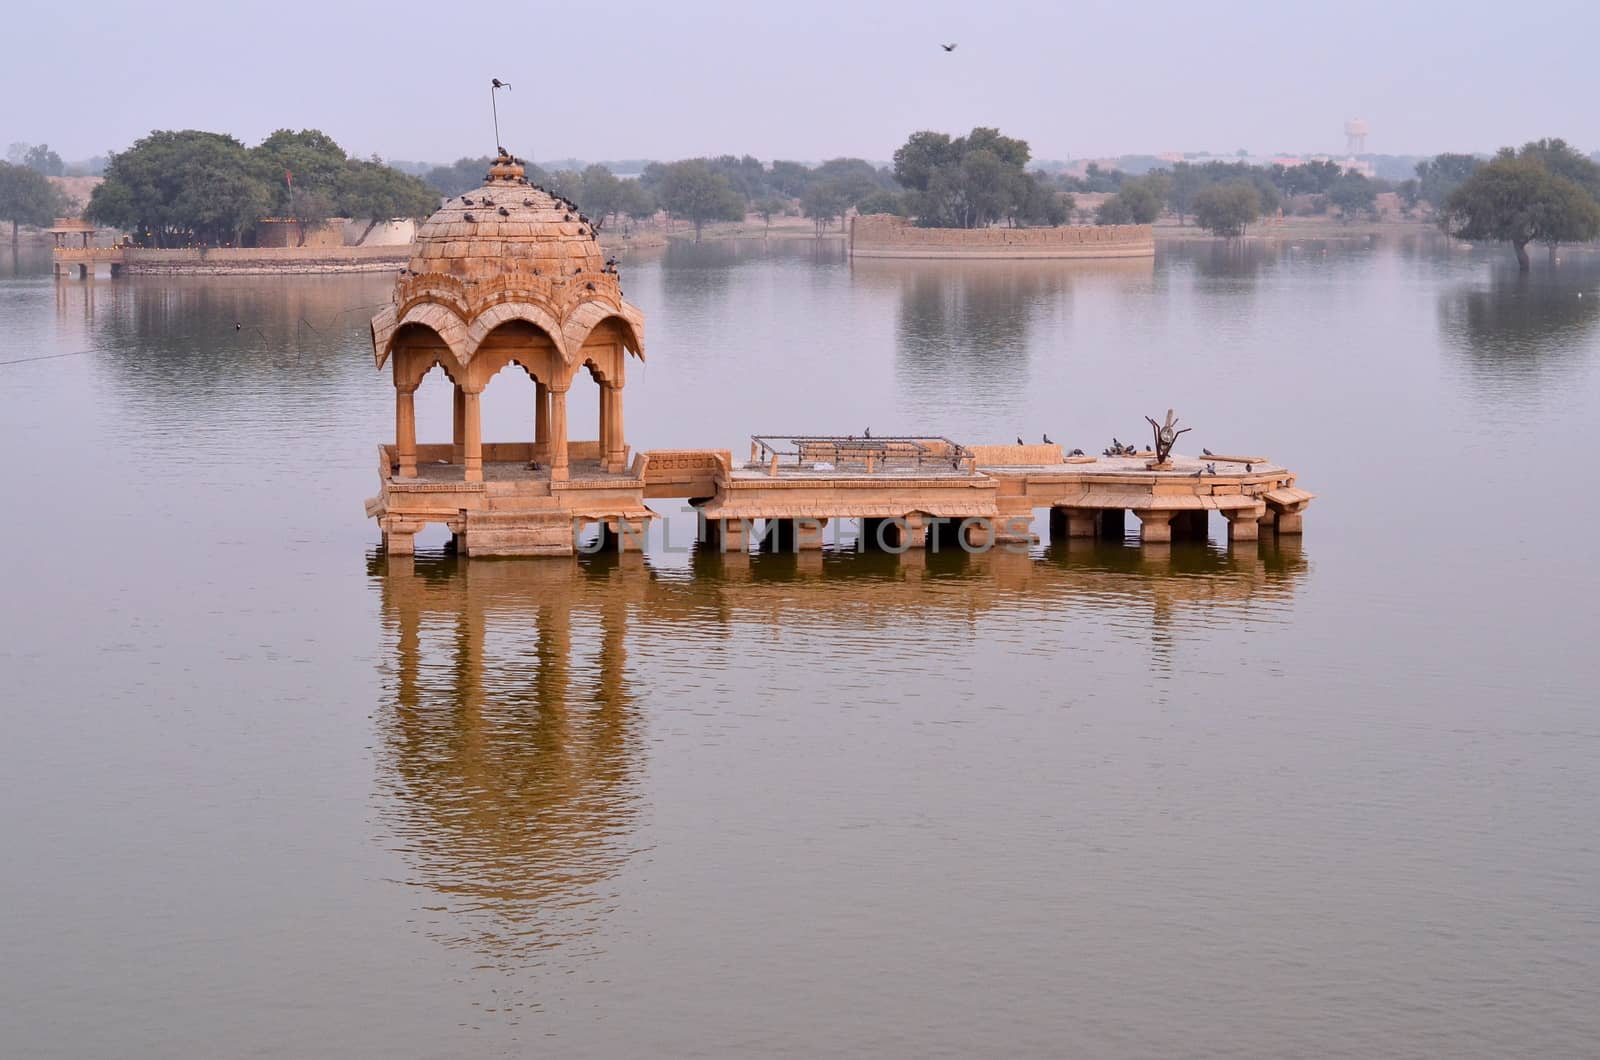 Gadisar Lake in Jaisalmer, Rajasthan, India is an artificial lake built by Raja Rawal Jaisal. Gadi sagar lake is surrounded by artistically carved Sandstone Chattri, Temples, Shrines and ghats.